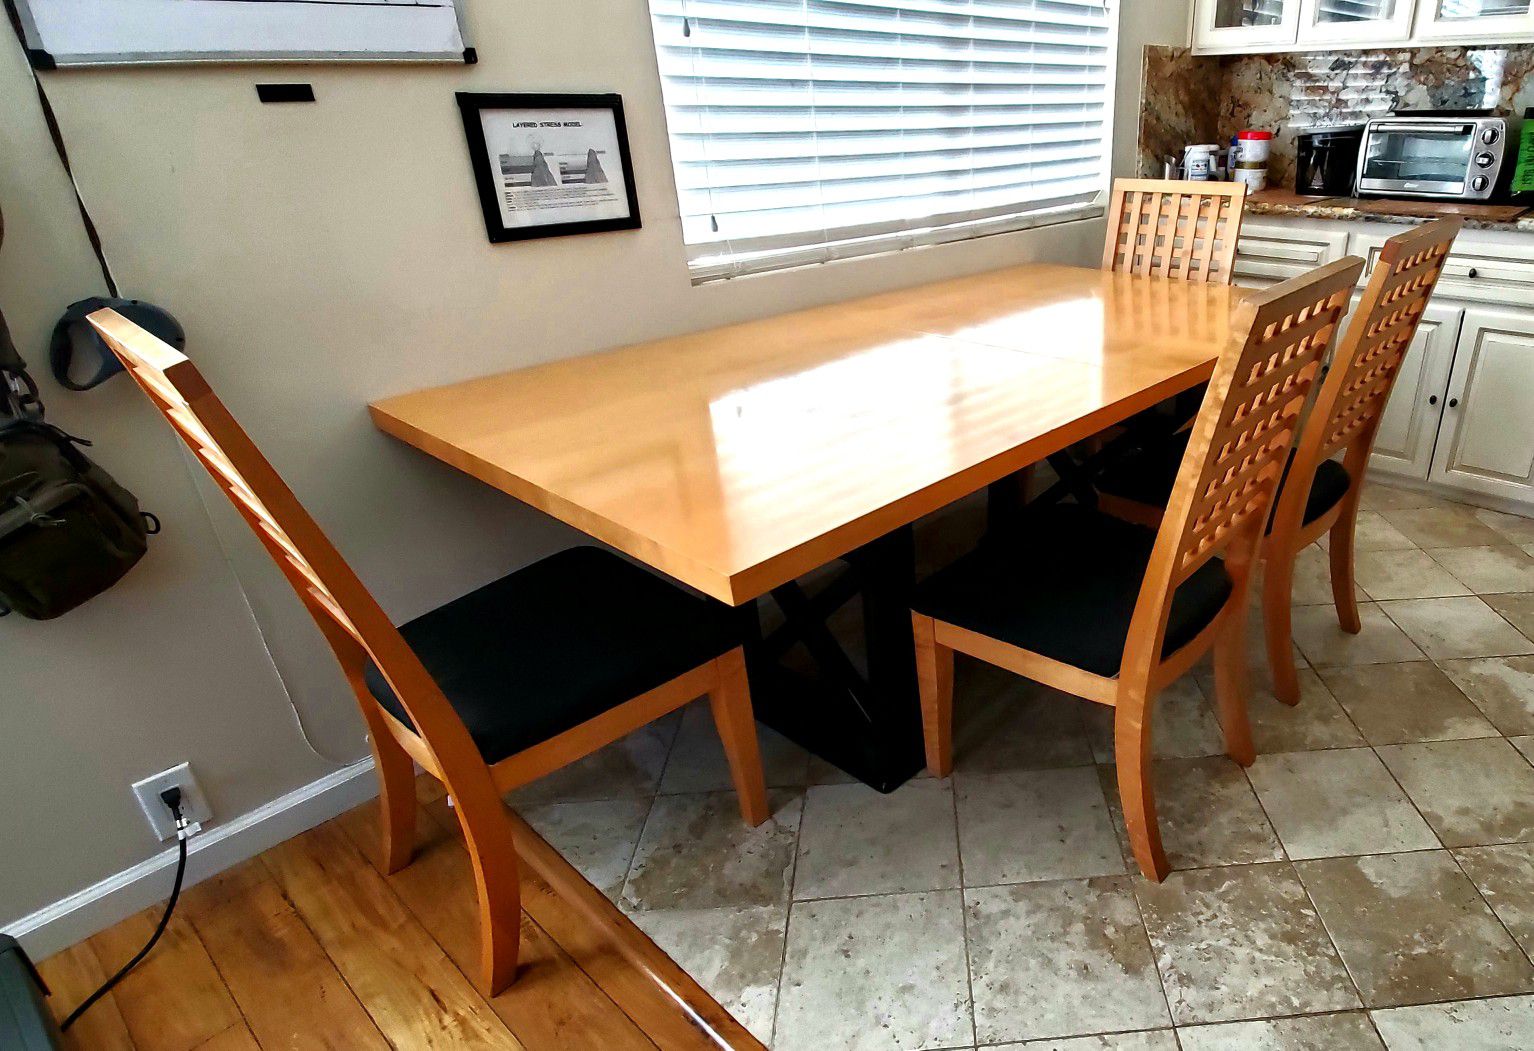 Kitchen Table for large family